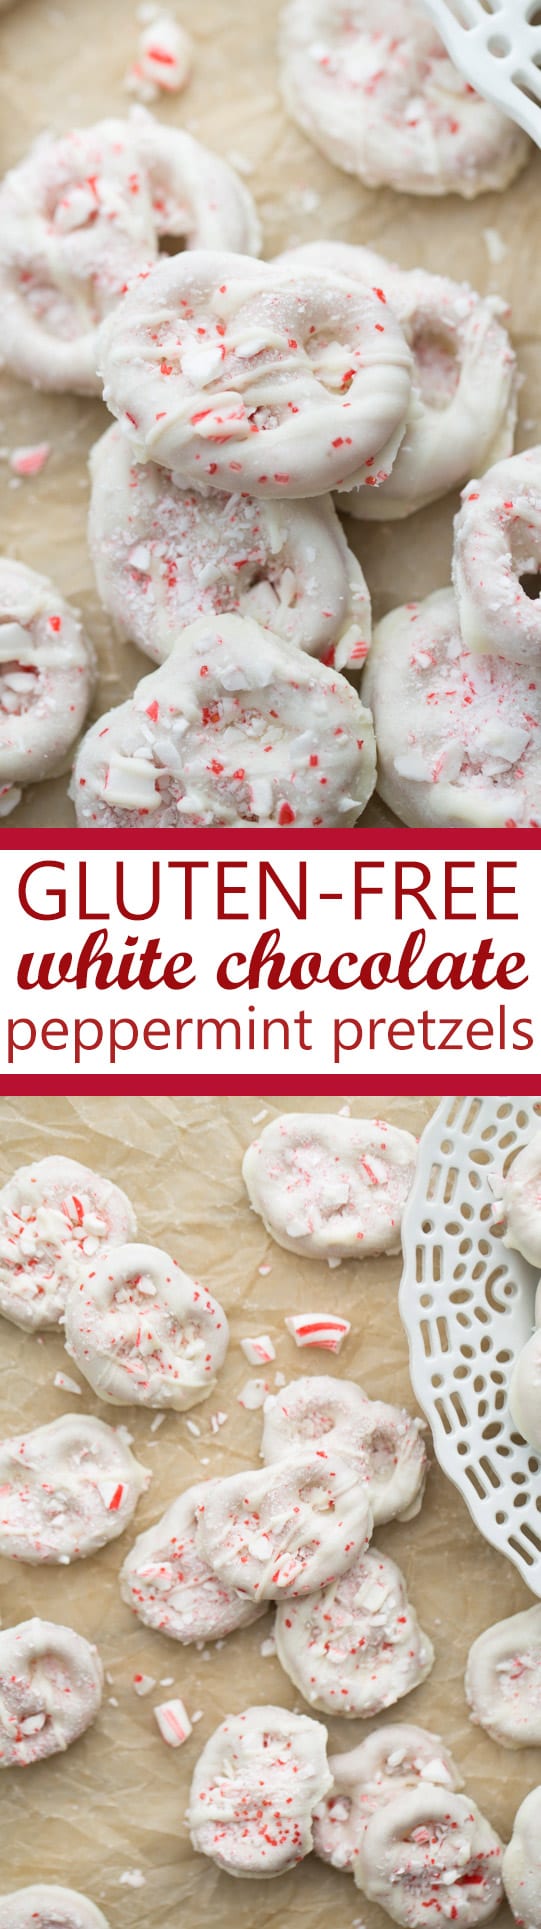 Gluten-Free White Chocolate Peppermint Pretzels! An easy and DELICIOUS food gift!